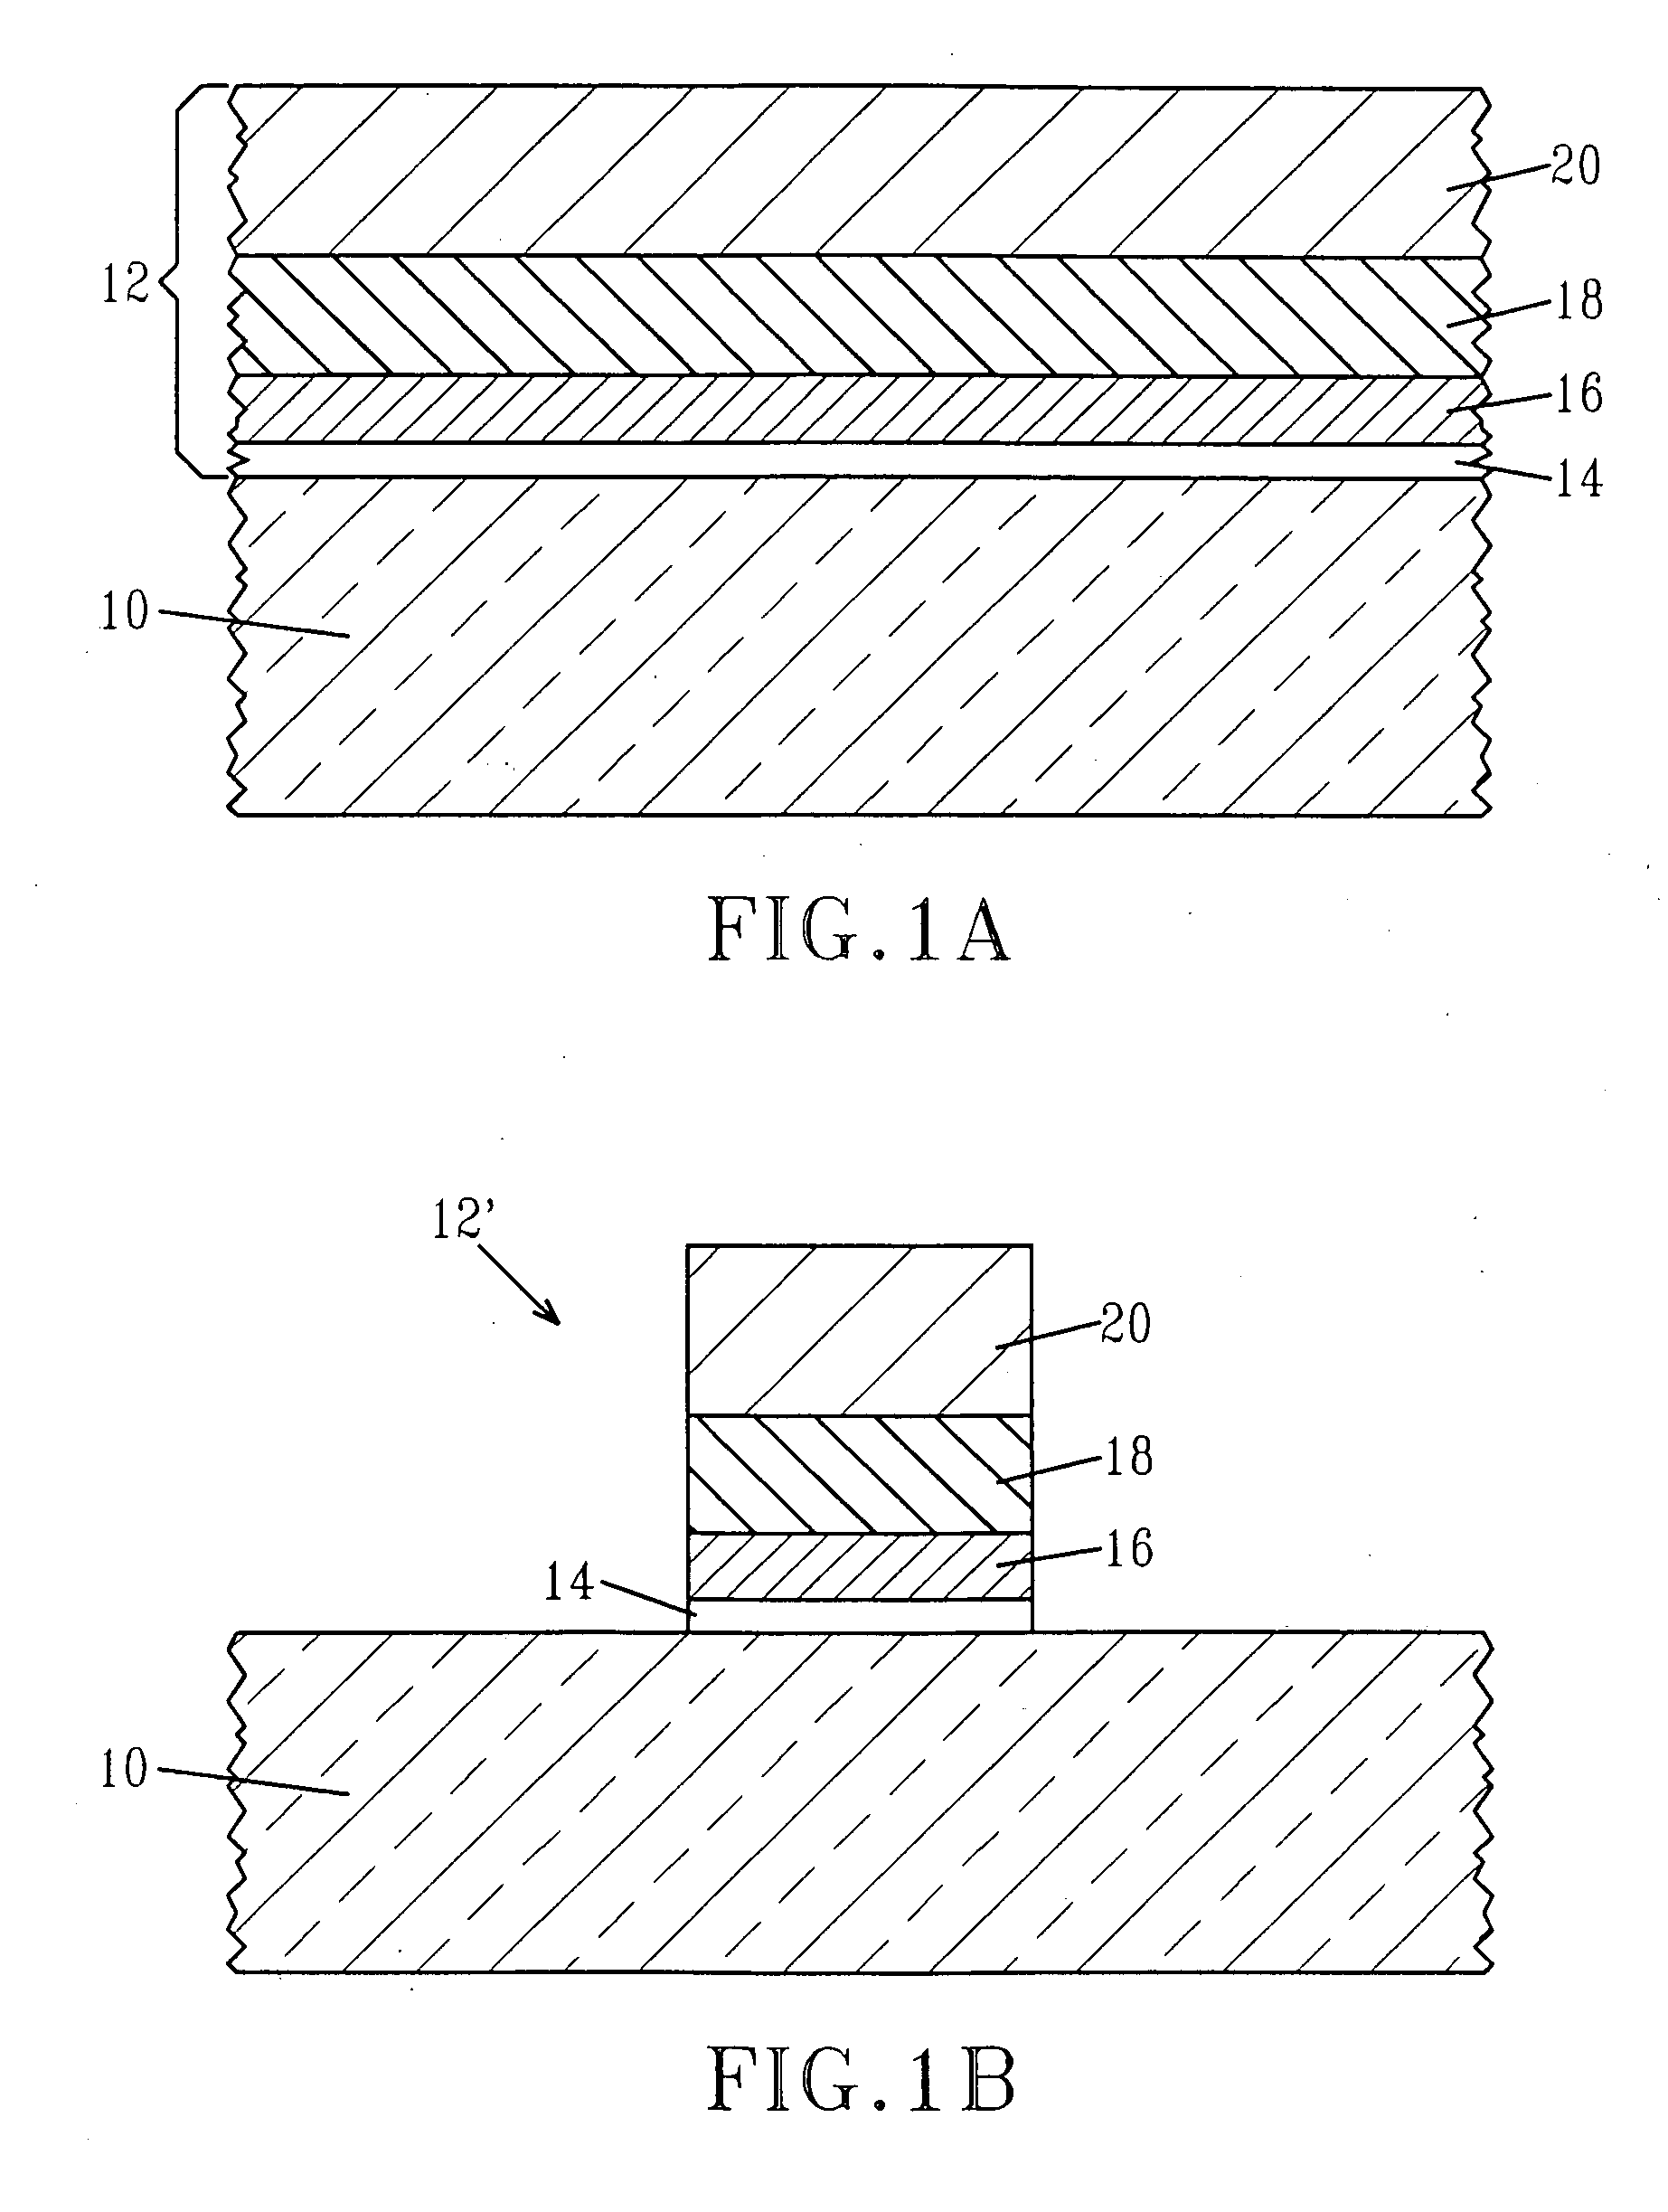 Using metal/metal nitride bilayers as gate electrodes in self-aligned aggressively scaled CMOS devices